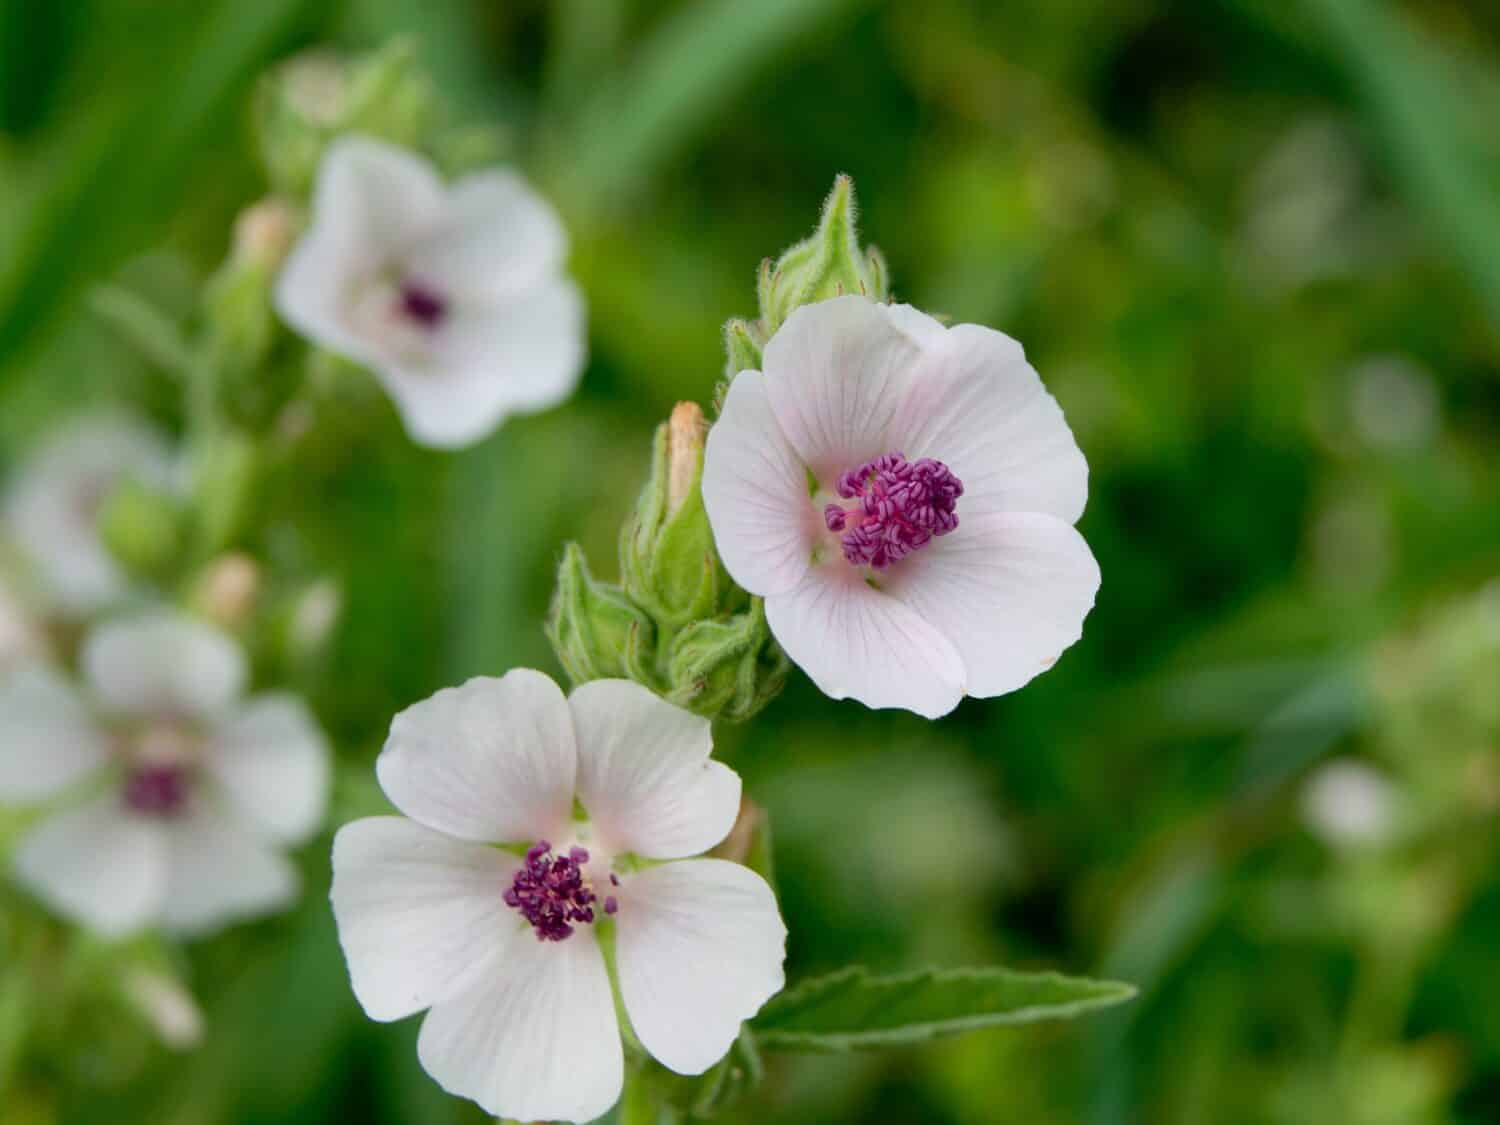 Marshmallow (Althaea officinalis) is a natural healing process.